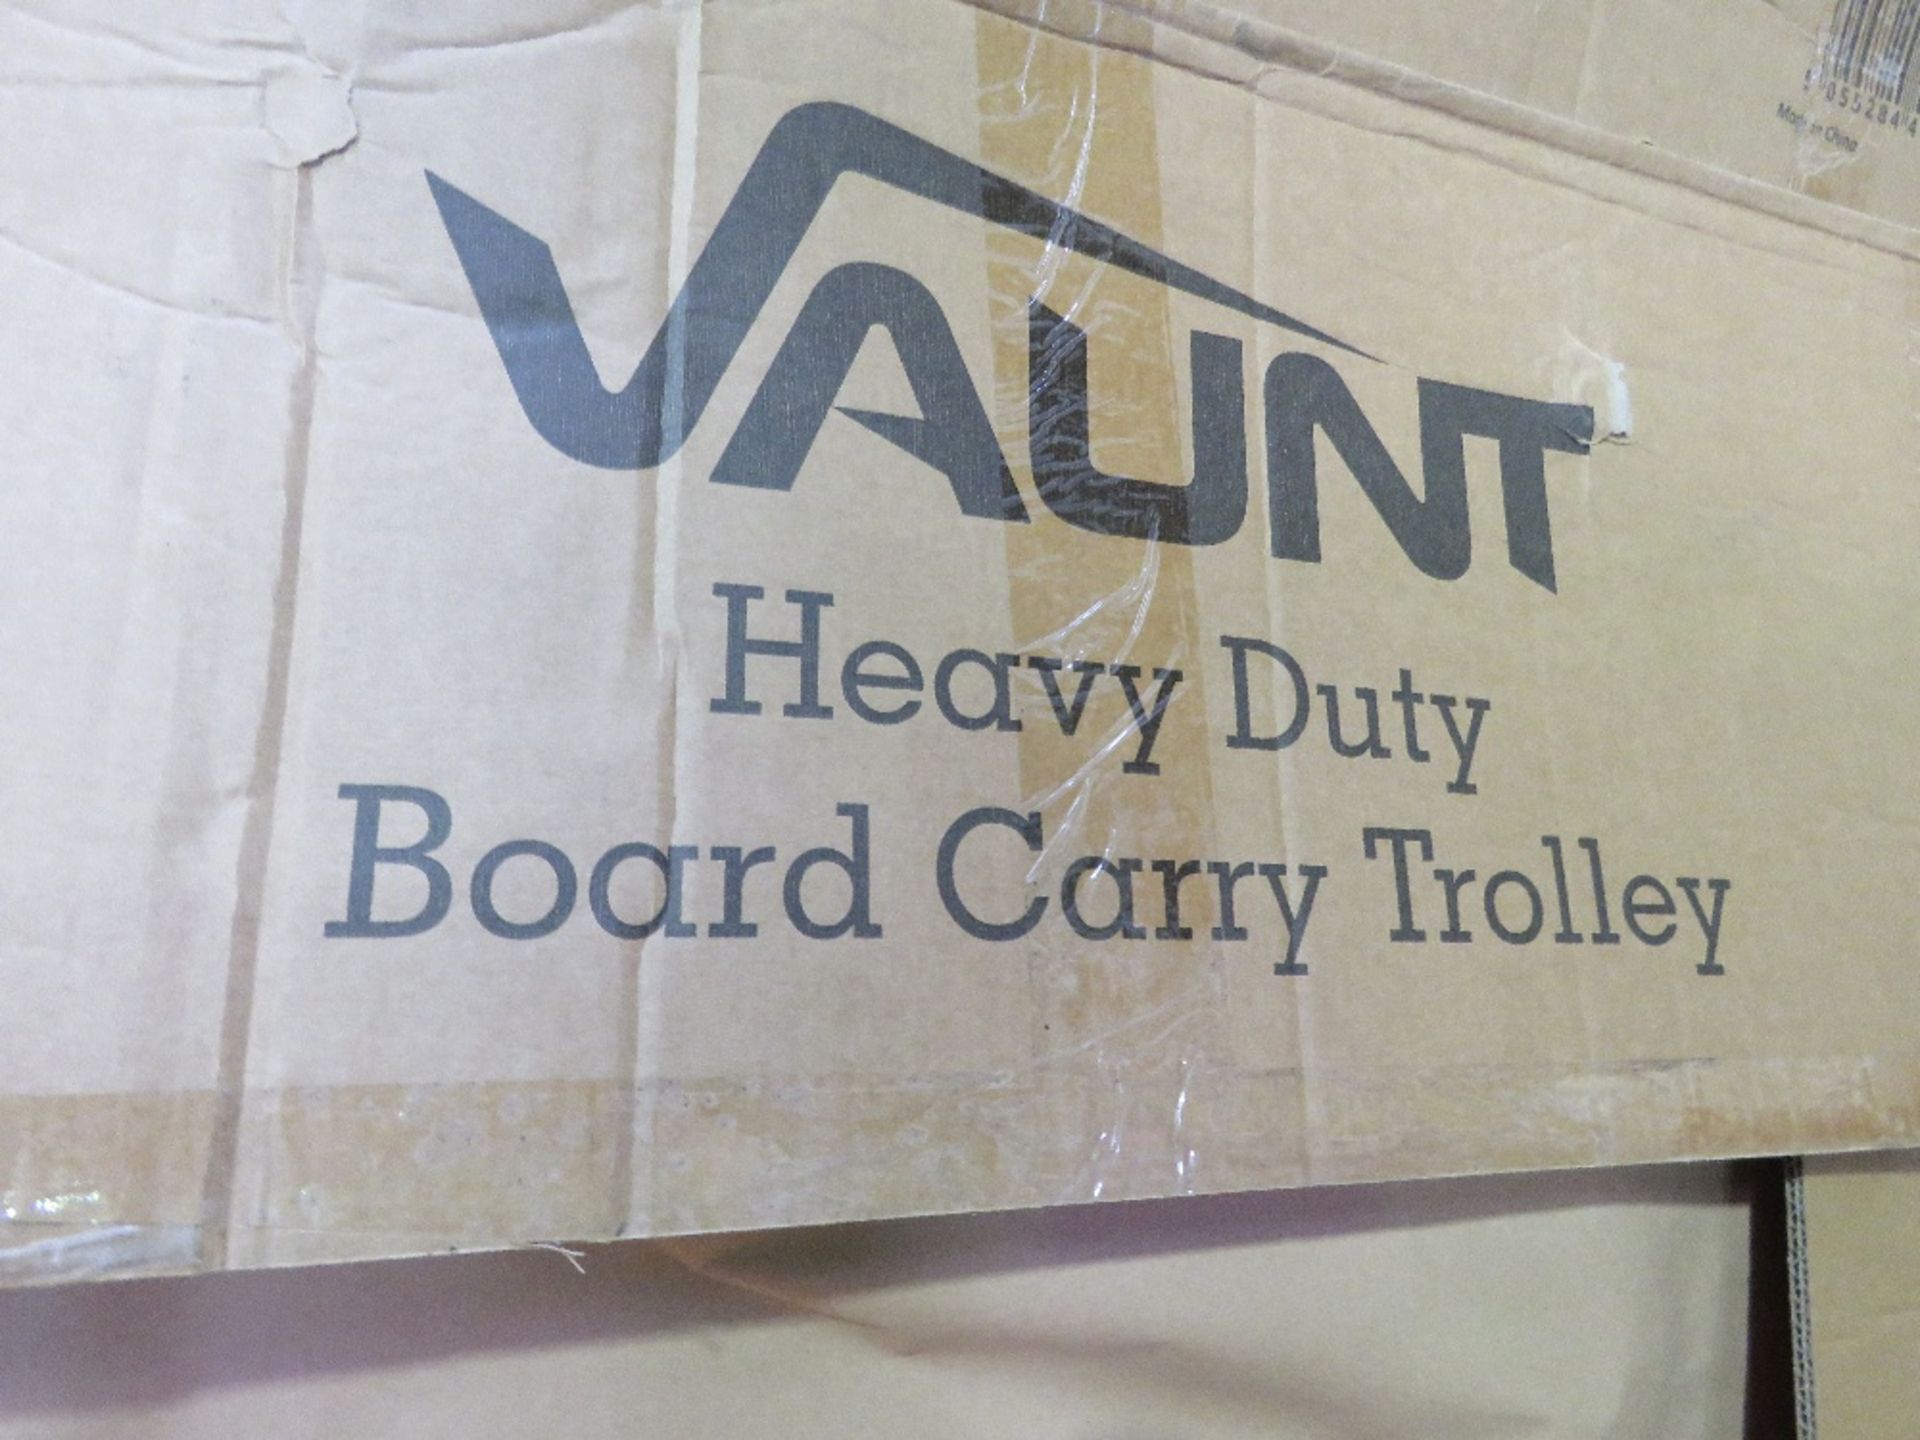 HEAVY DUTY BOARD CARRYING TROLLEY IN A BOX, CONDITION UNKNOWN. - Image 2 of 5